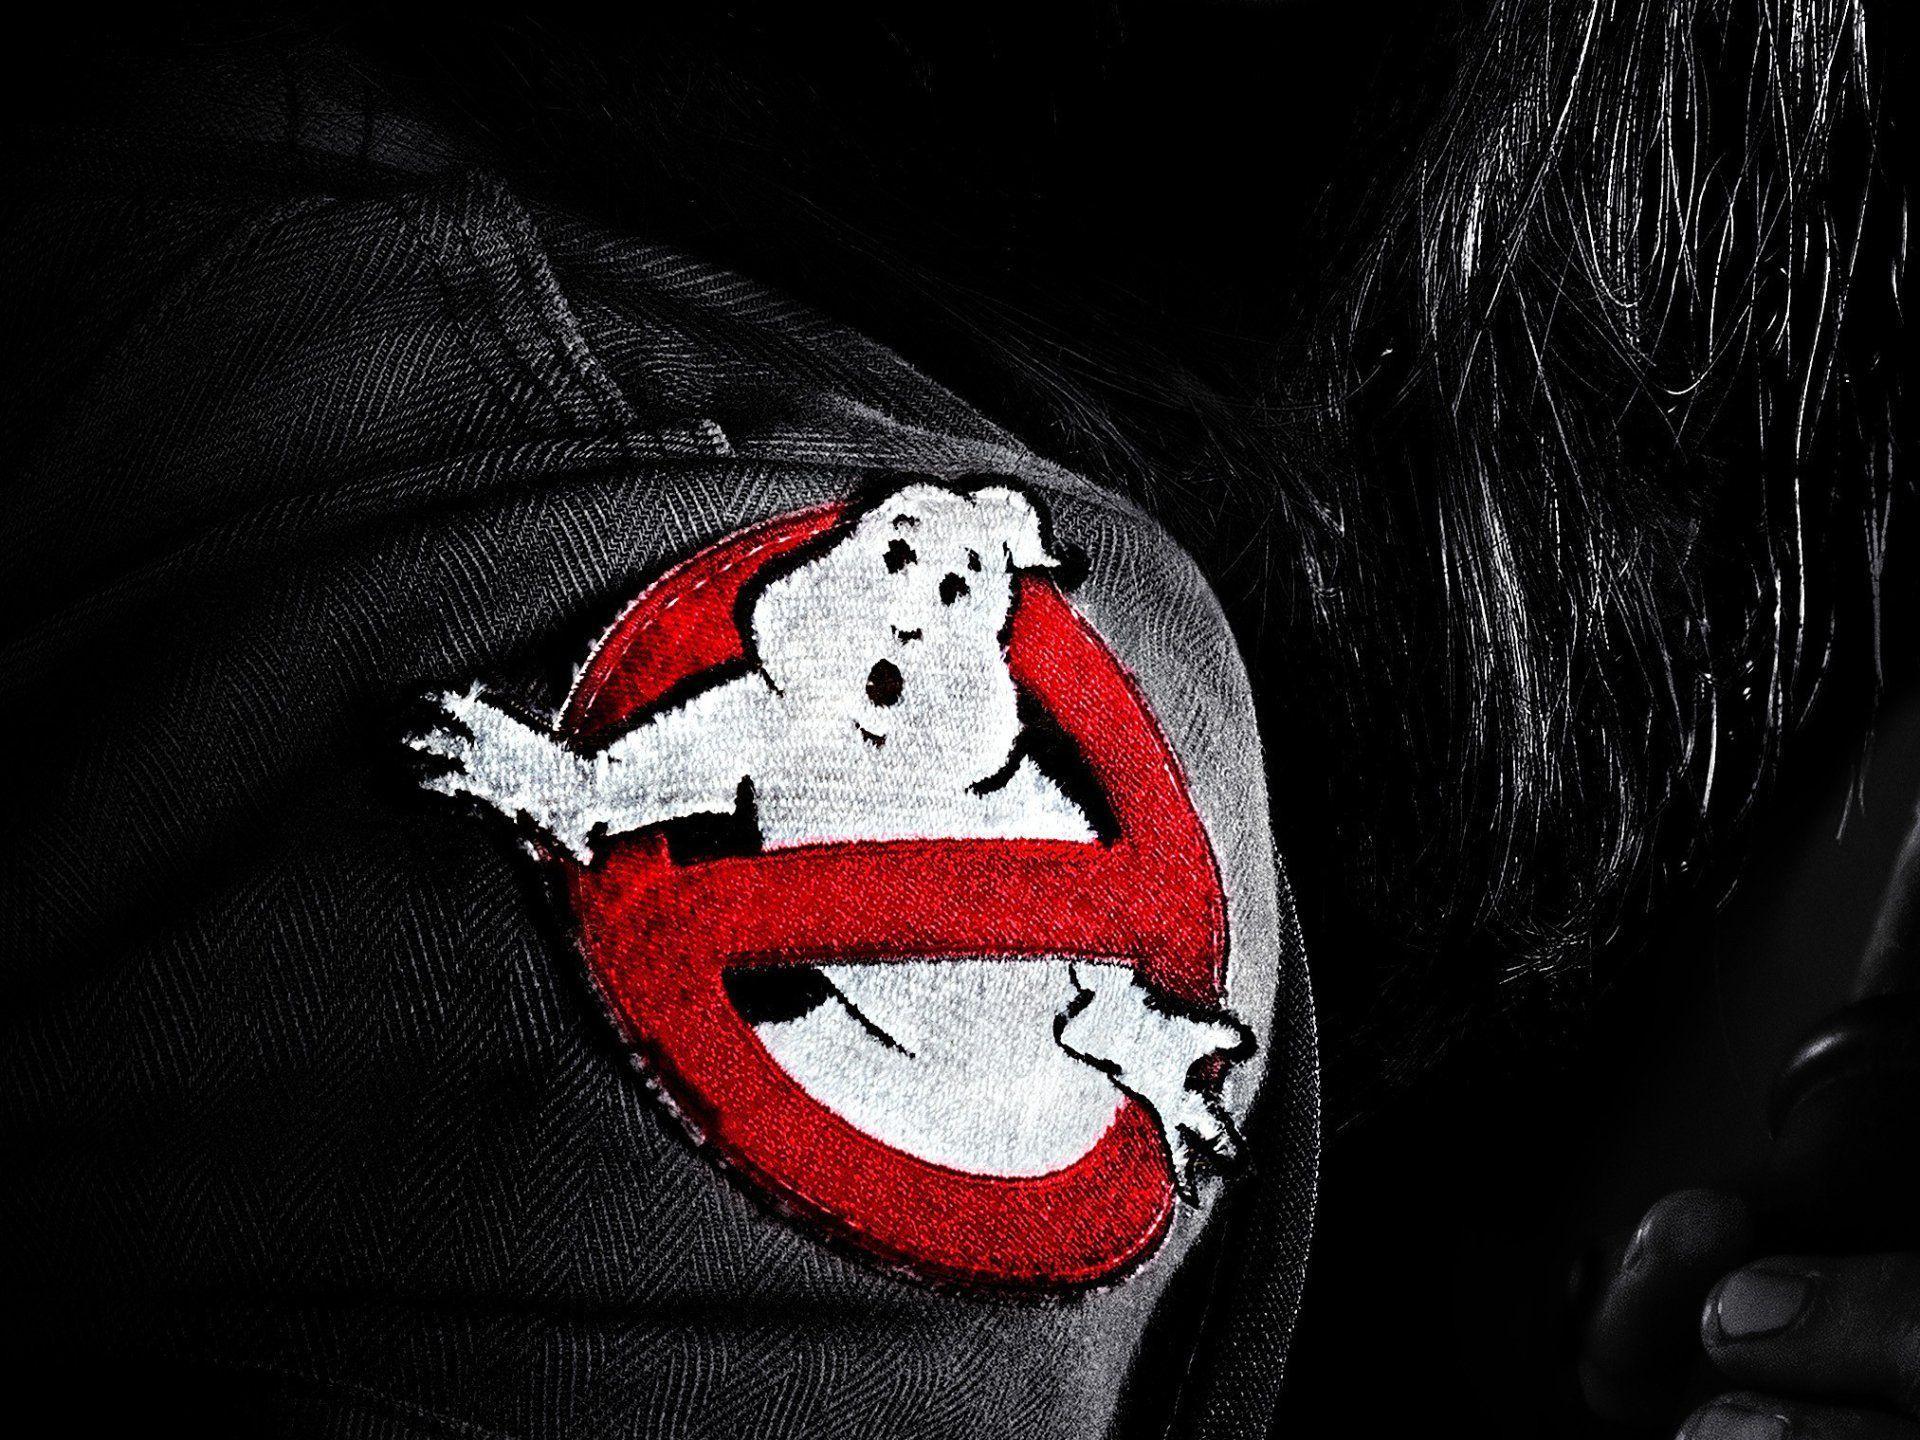 Ghostbusters Wallpapers Wallpaper Cave